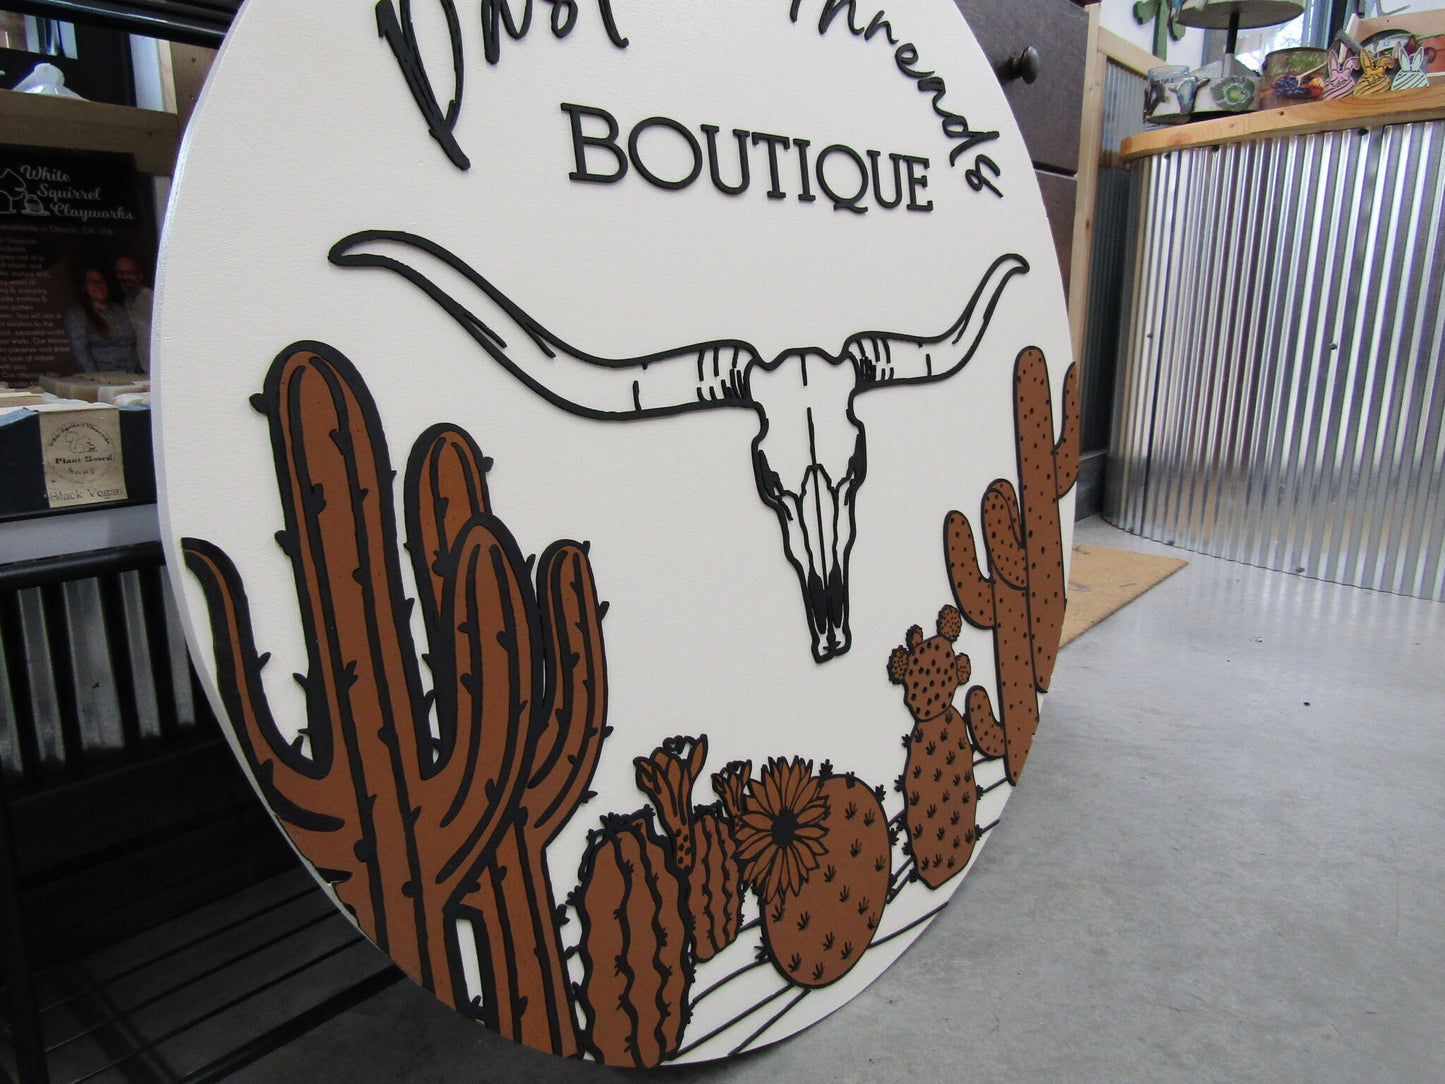 Custom Boutique Logo Sign Commerical Signage Longhorn Desert Steer Cactus Cacti Skull Rustic Look 3D Raised Elevated Round Circle Storefront